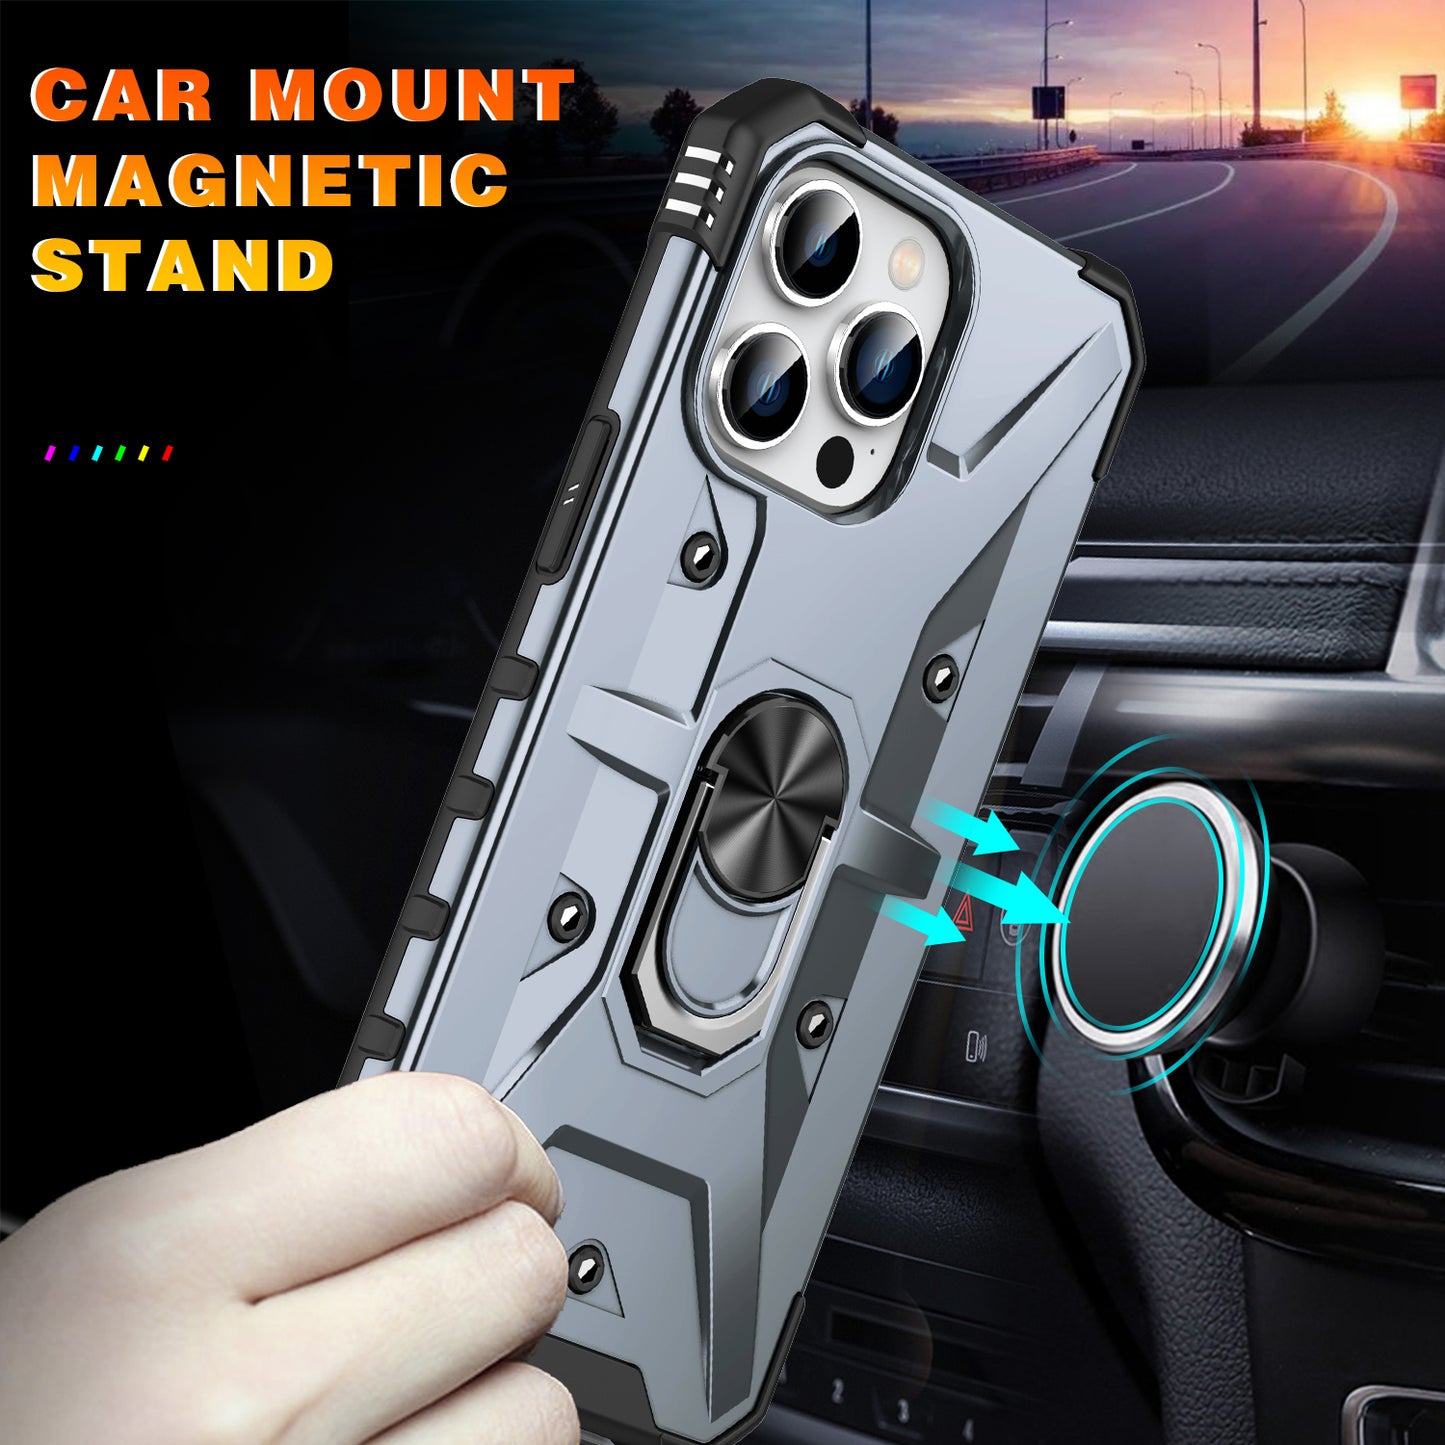 kickstand mobile phone accessories back cover with camera ring holder shockproof armor phone case for iphone 11 pro max